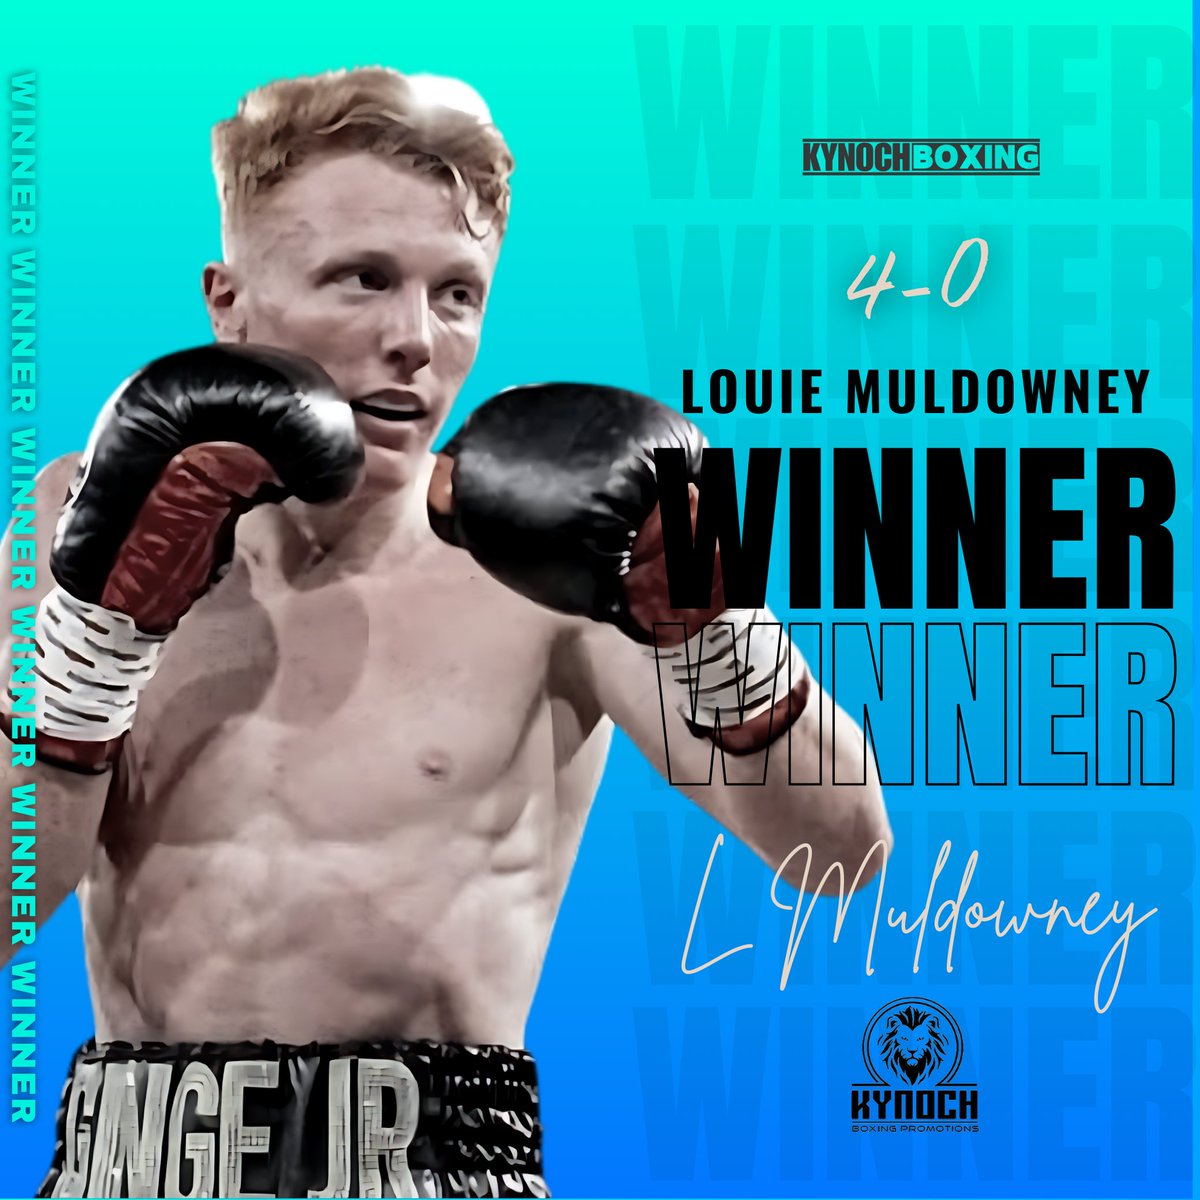 Magic Muldowney 💫

Another impressive display from top talent Louie Muldowney.🥊

He dominates over 4 rounds to earn a points decision and moves to 4-0.💥

Exciting future ahead and building momentum nicely.👊

#boxing #kynochboxing #fightnight